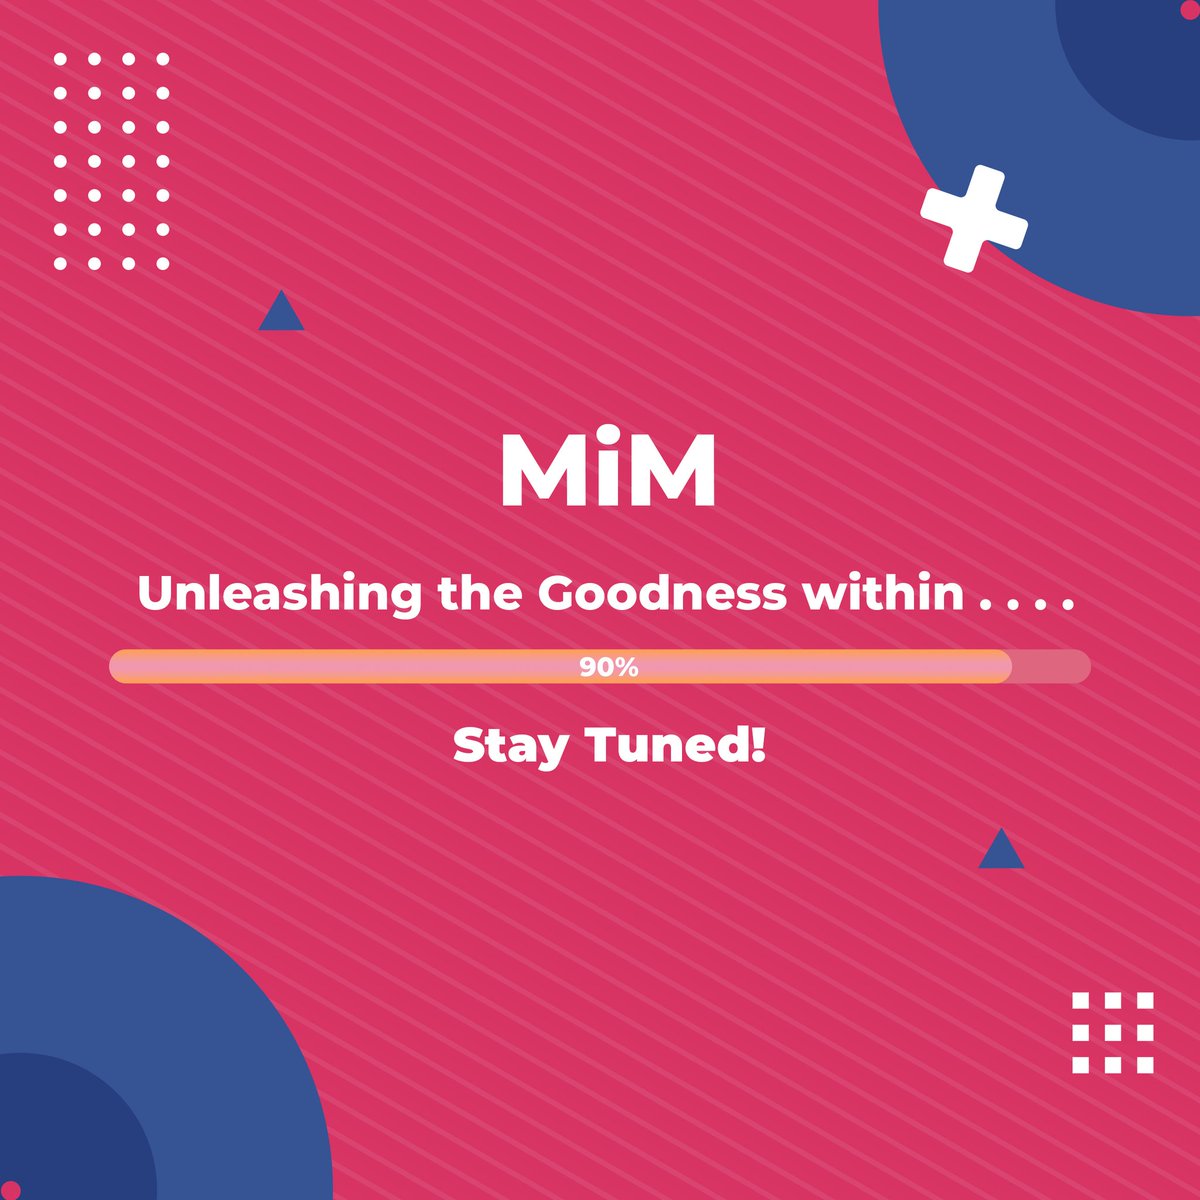 The Goodness lies within YOU!

Stay Tuned! 

#YourImpactMatters #ImpactfulLiving #ComingSoon #StayTuned